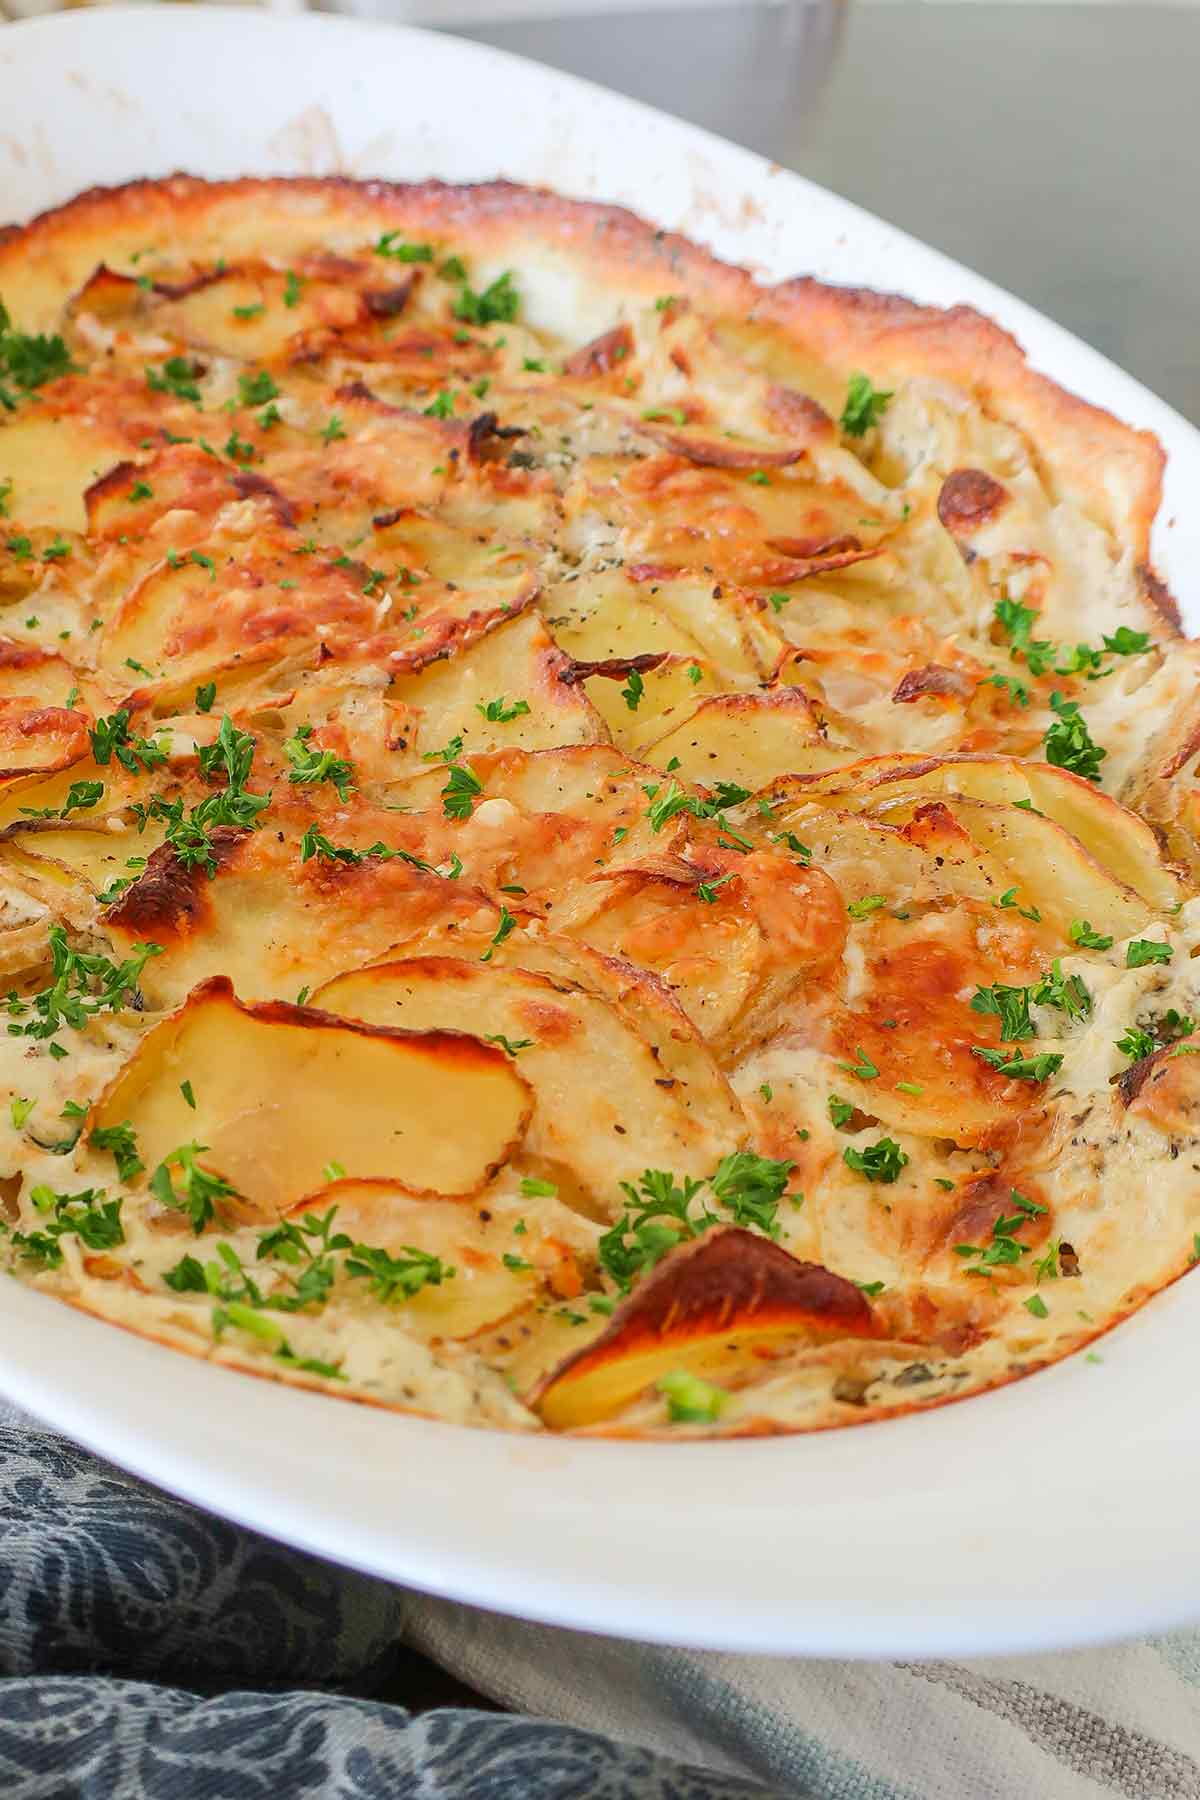 baked layered potatoes with onions with cream sauce in a casserole dish